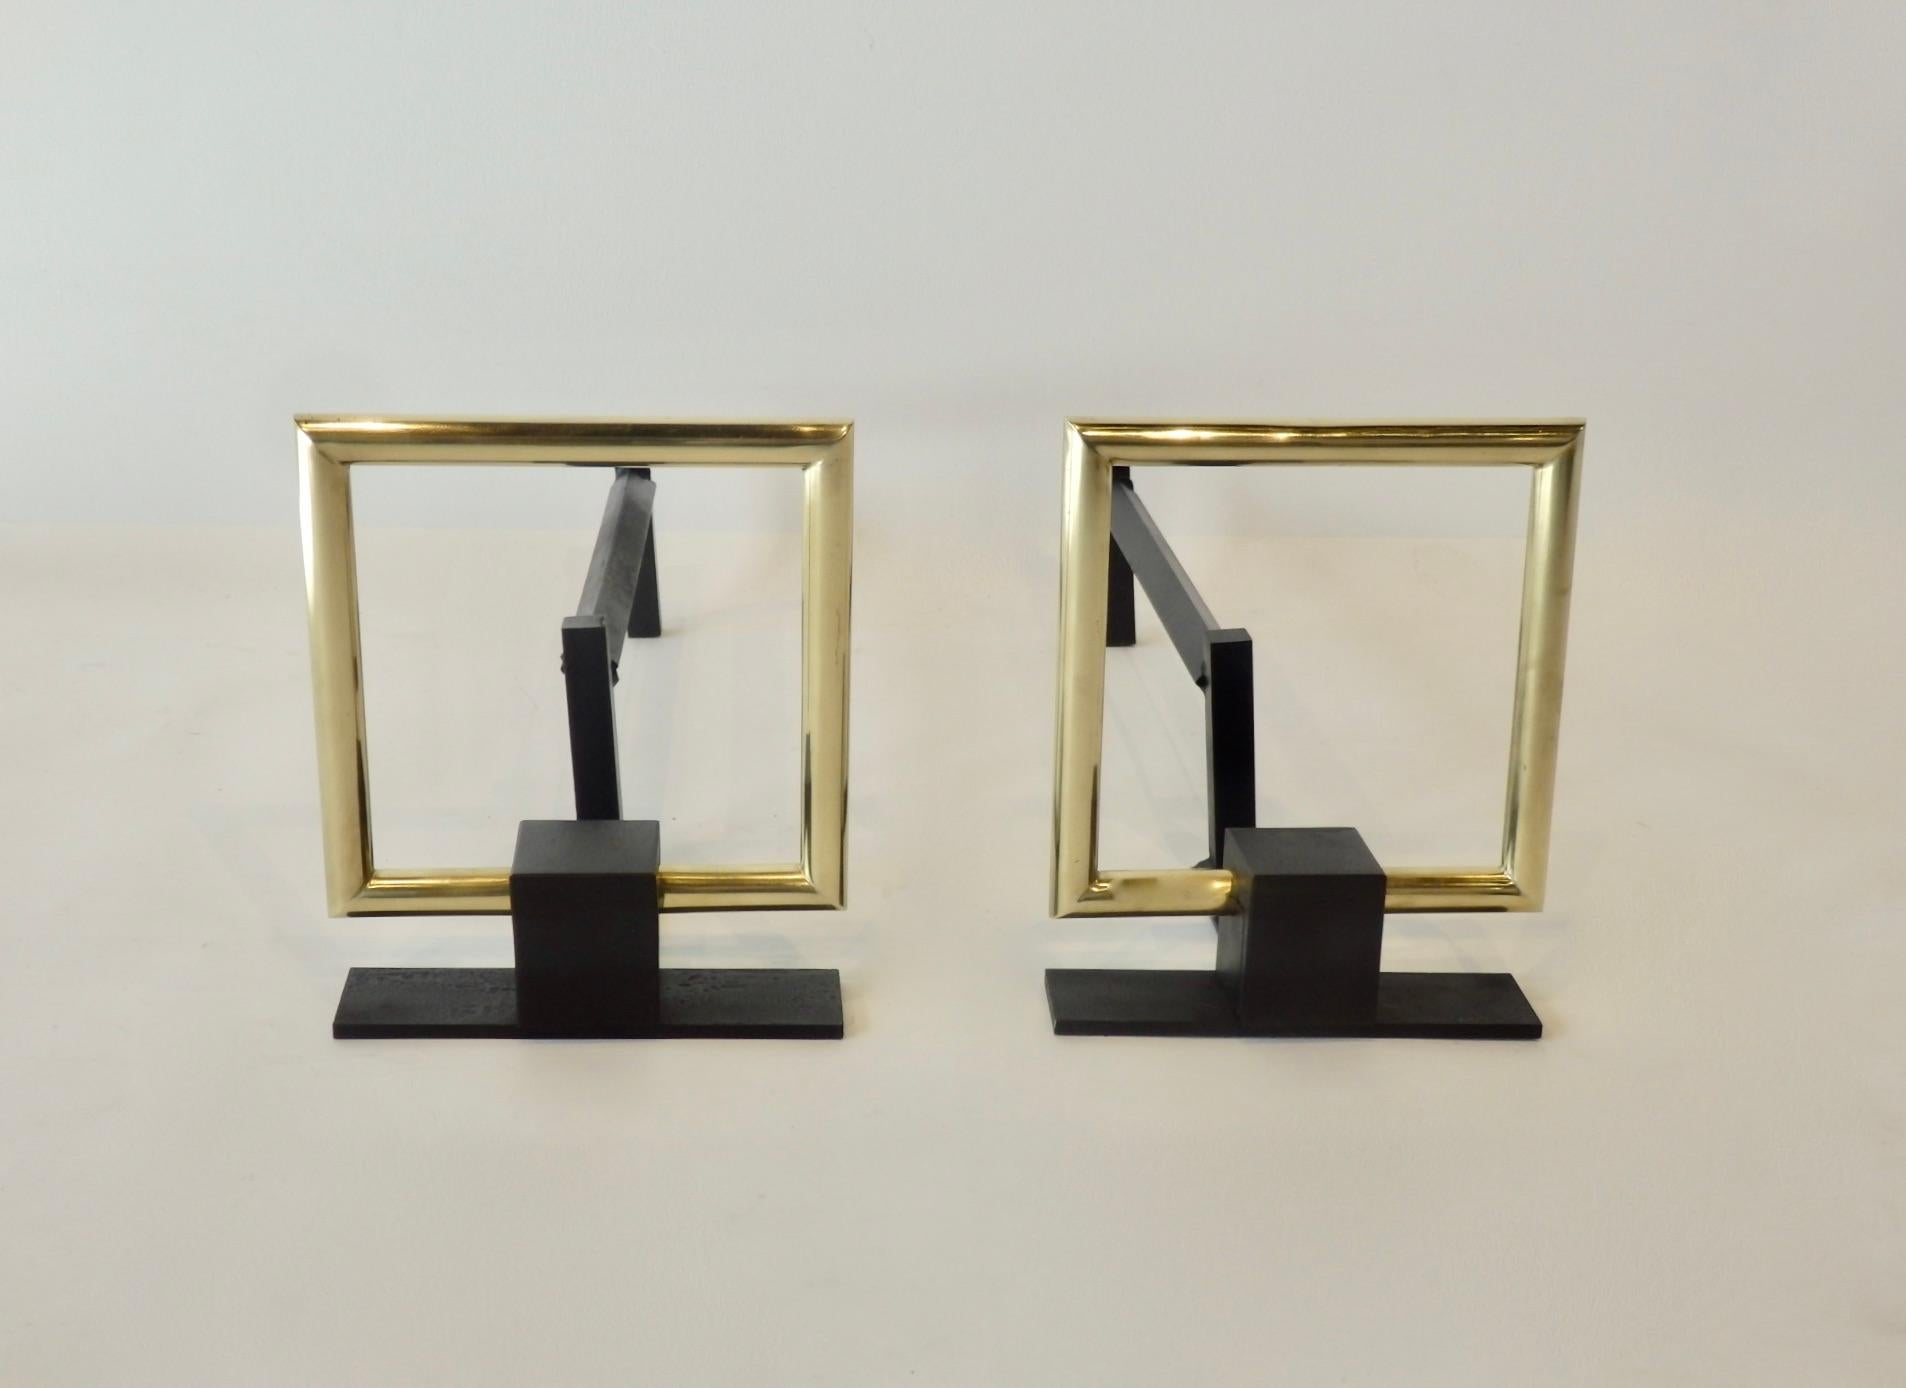 20th Century Donald Deskey Style Polished Brass and Steel Art Deco Fireplace Andirons For Sale